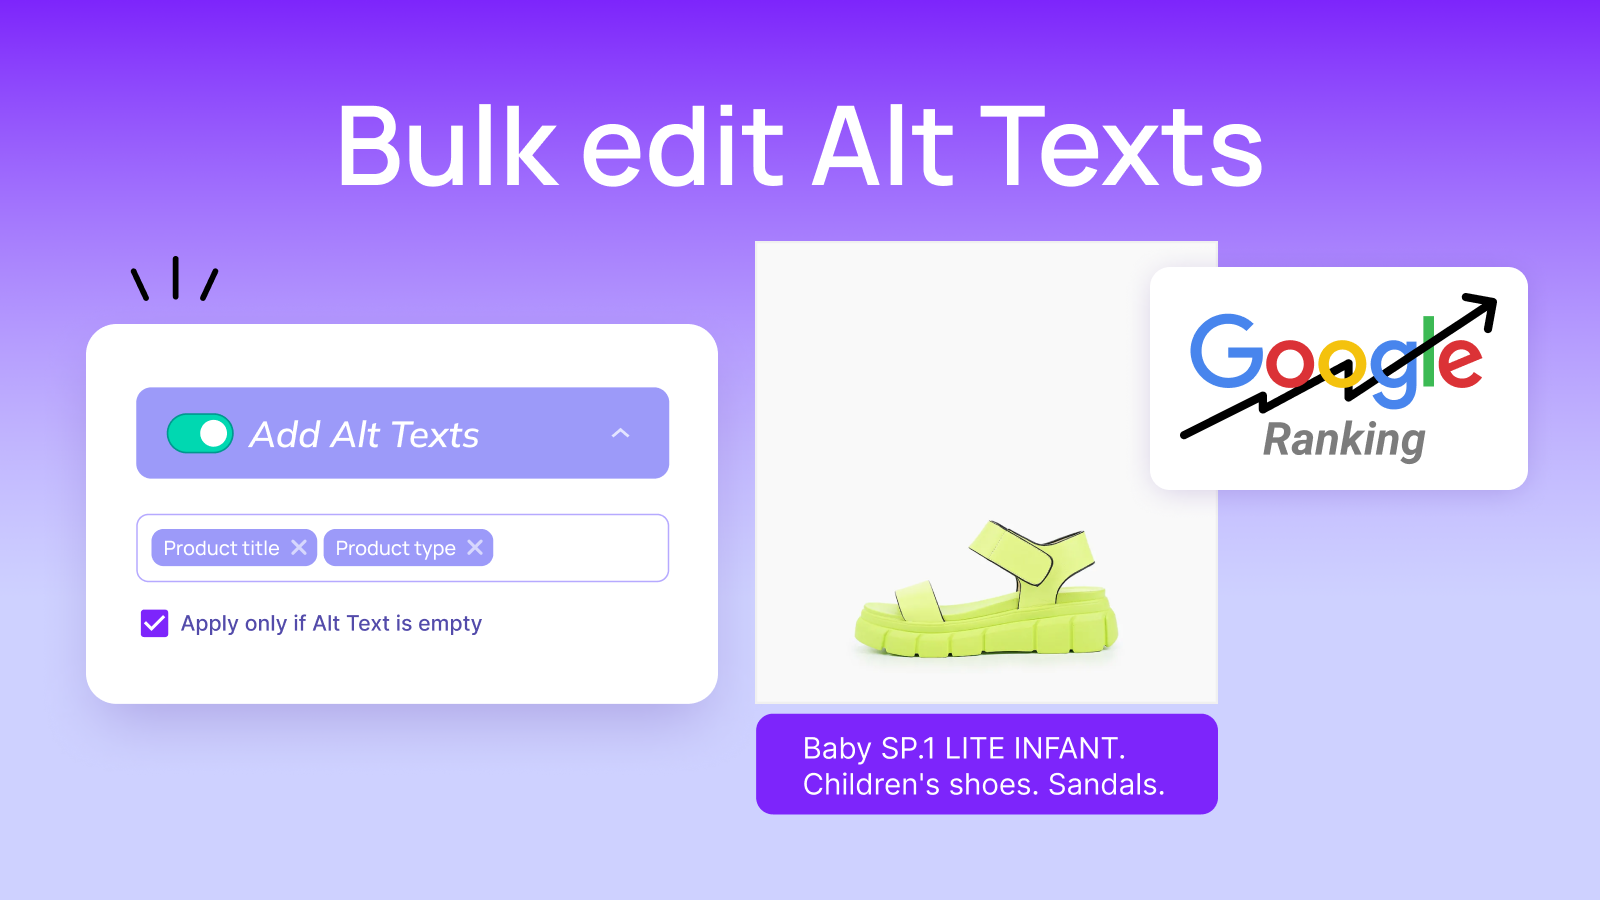 Add "Alt texts" to improve your SEO results and Google ranking